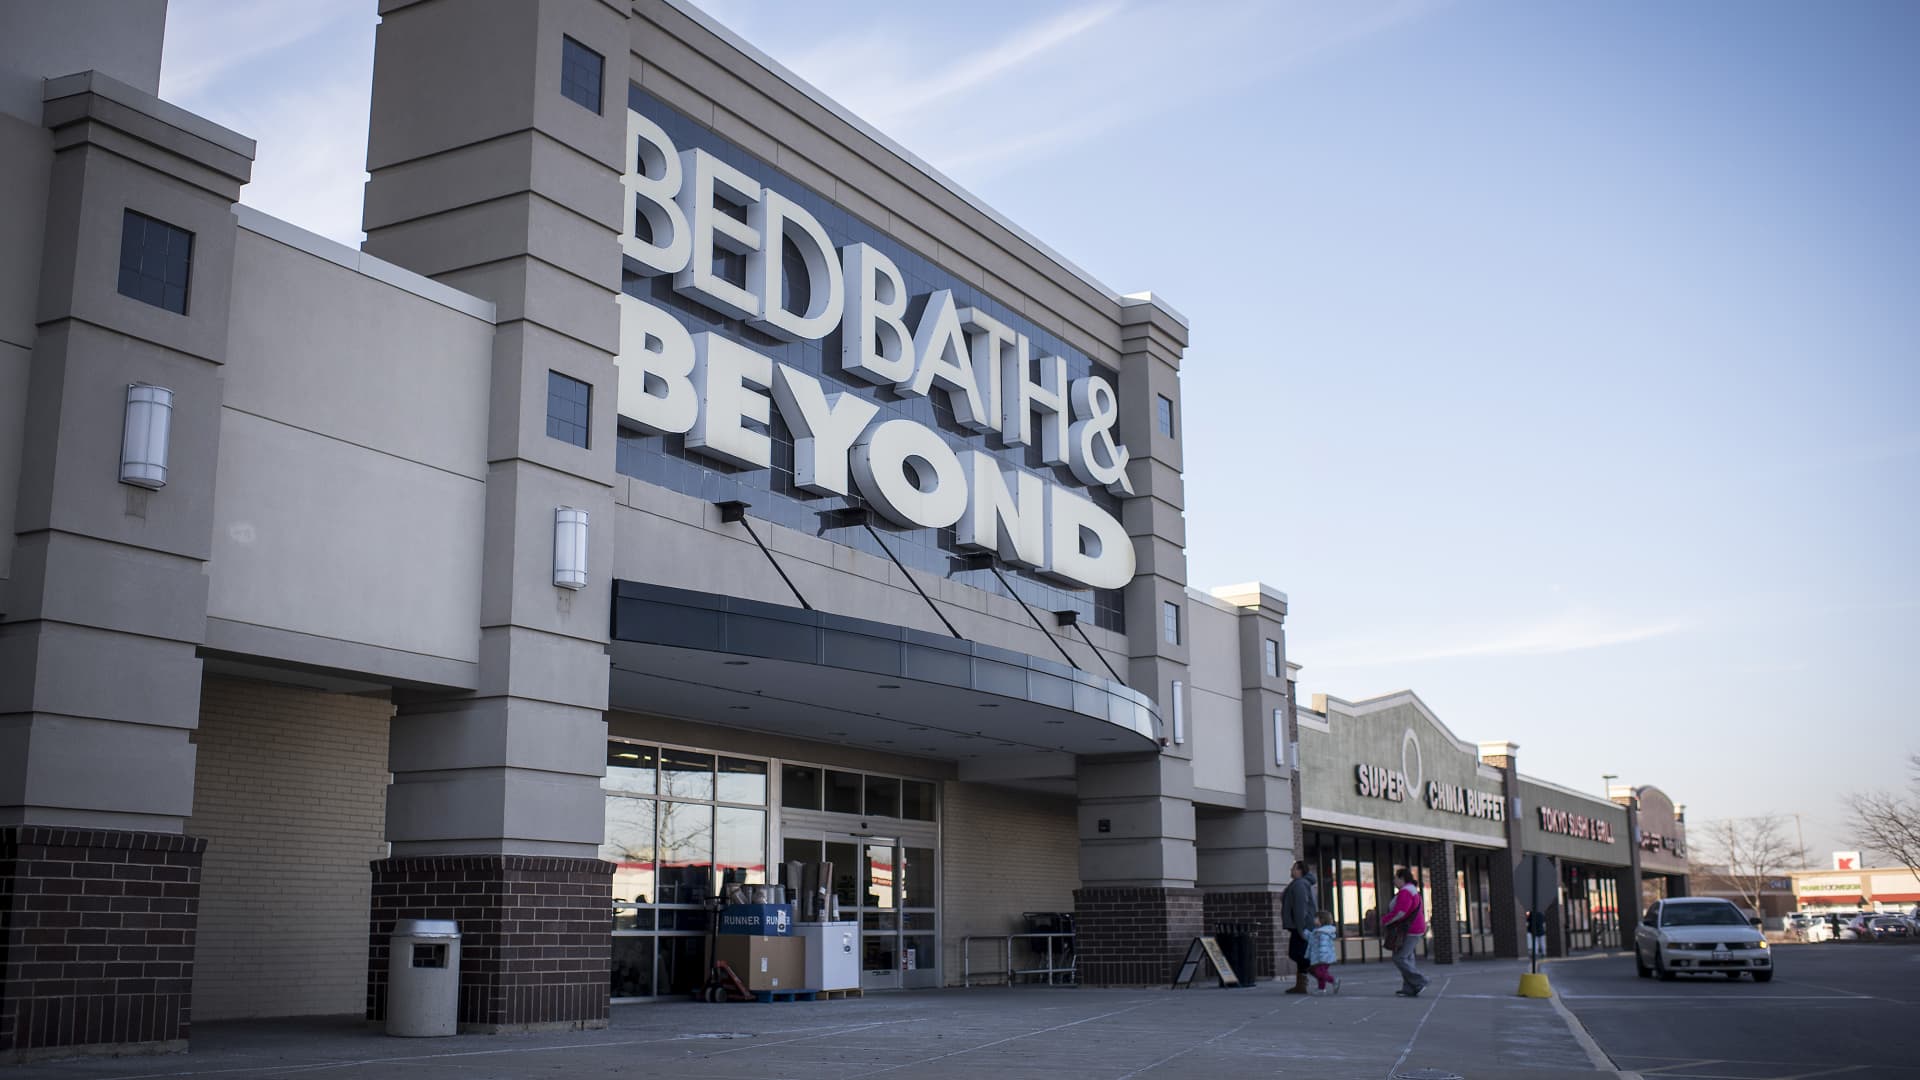 Shoppers arrive at a Bed Bath & Beyond Inc. store in Norridge, Illinois.